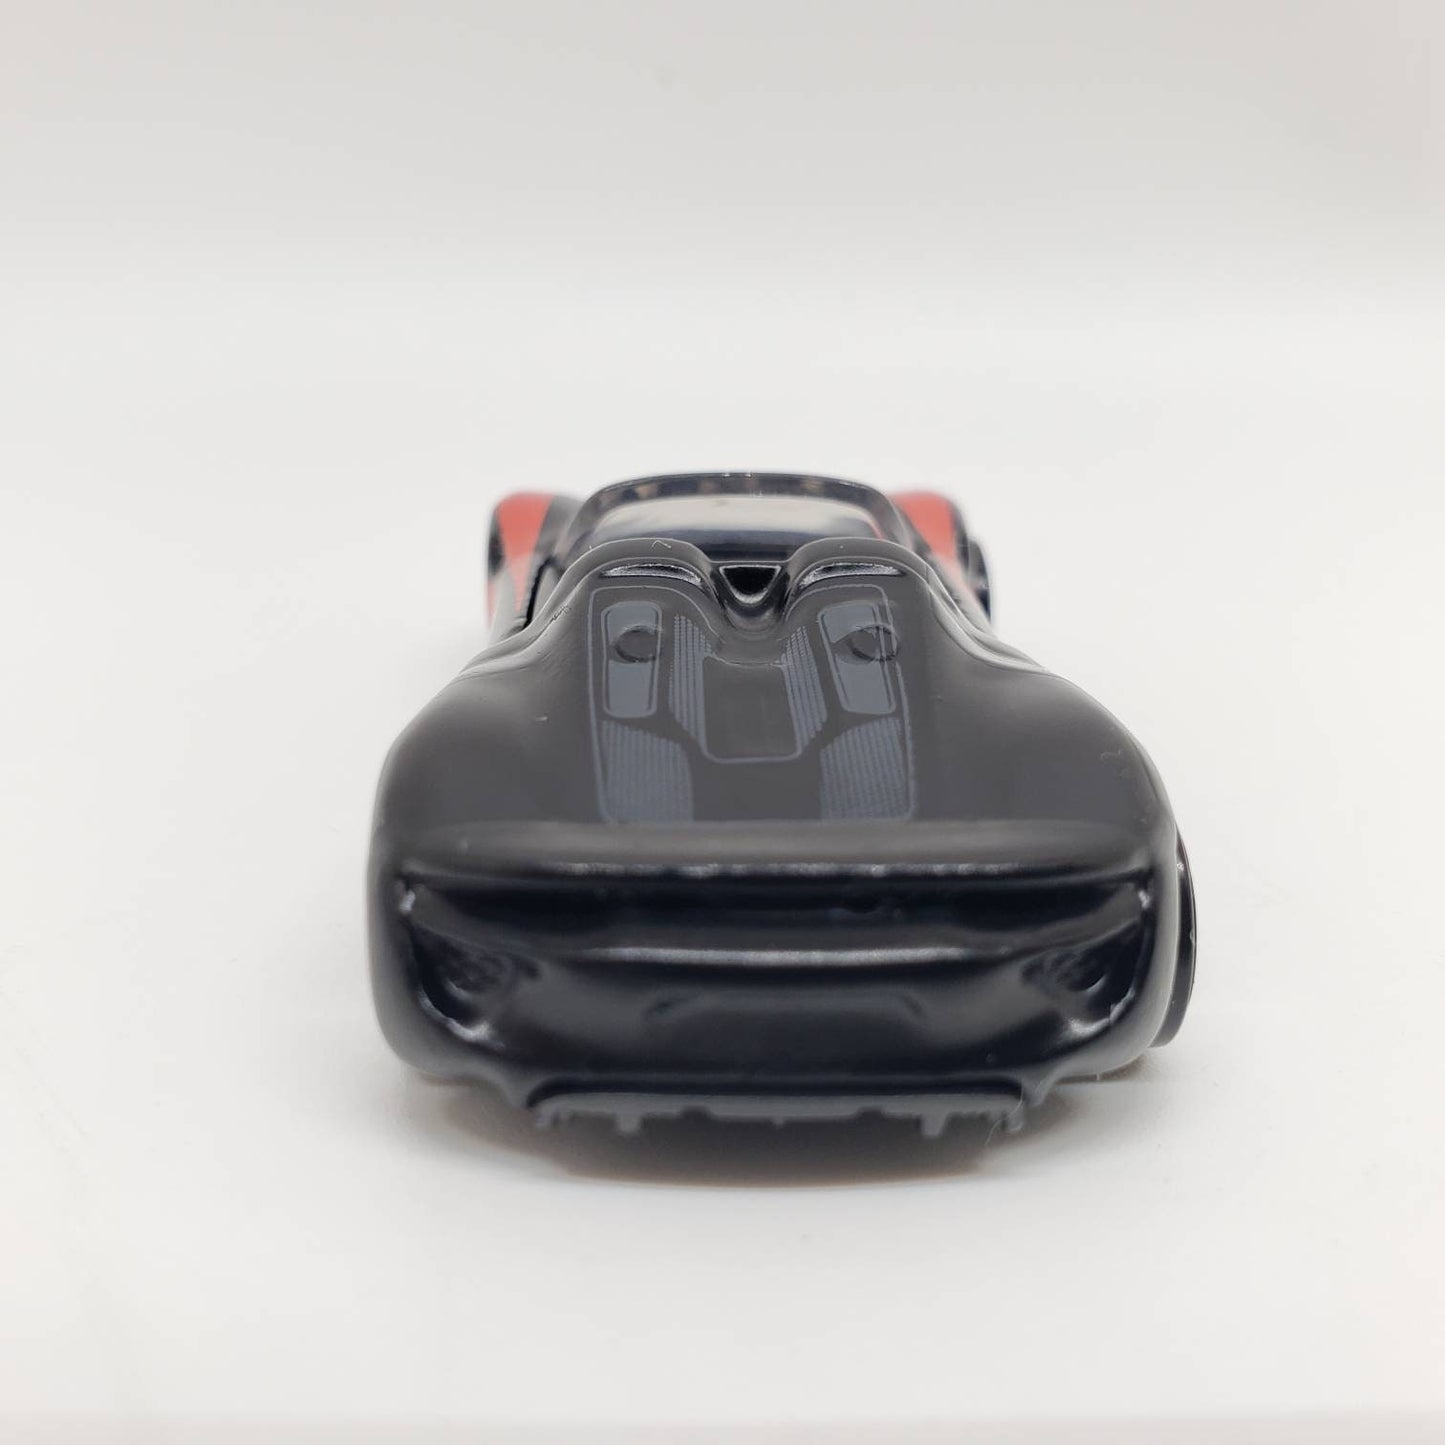 Hot Wheels Porsche 918 Spyder Black HW Roadsters Perfect Birthday Gift Miniature Collectable Model Toy Car